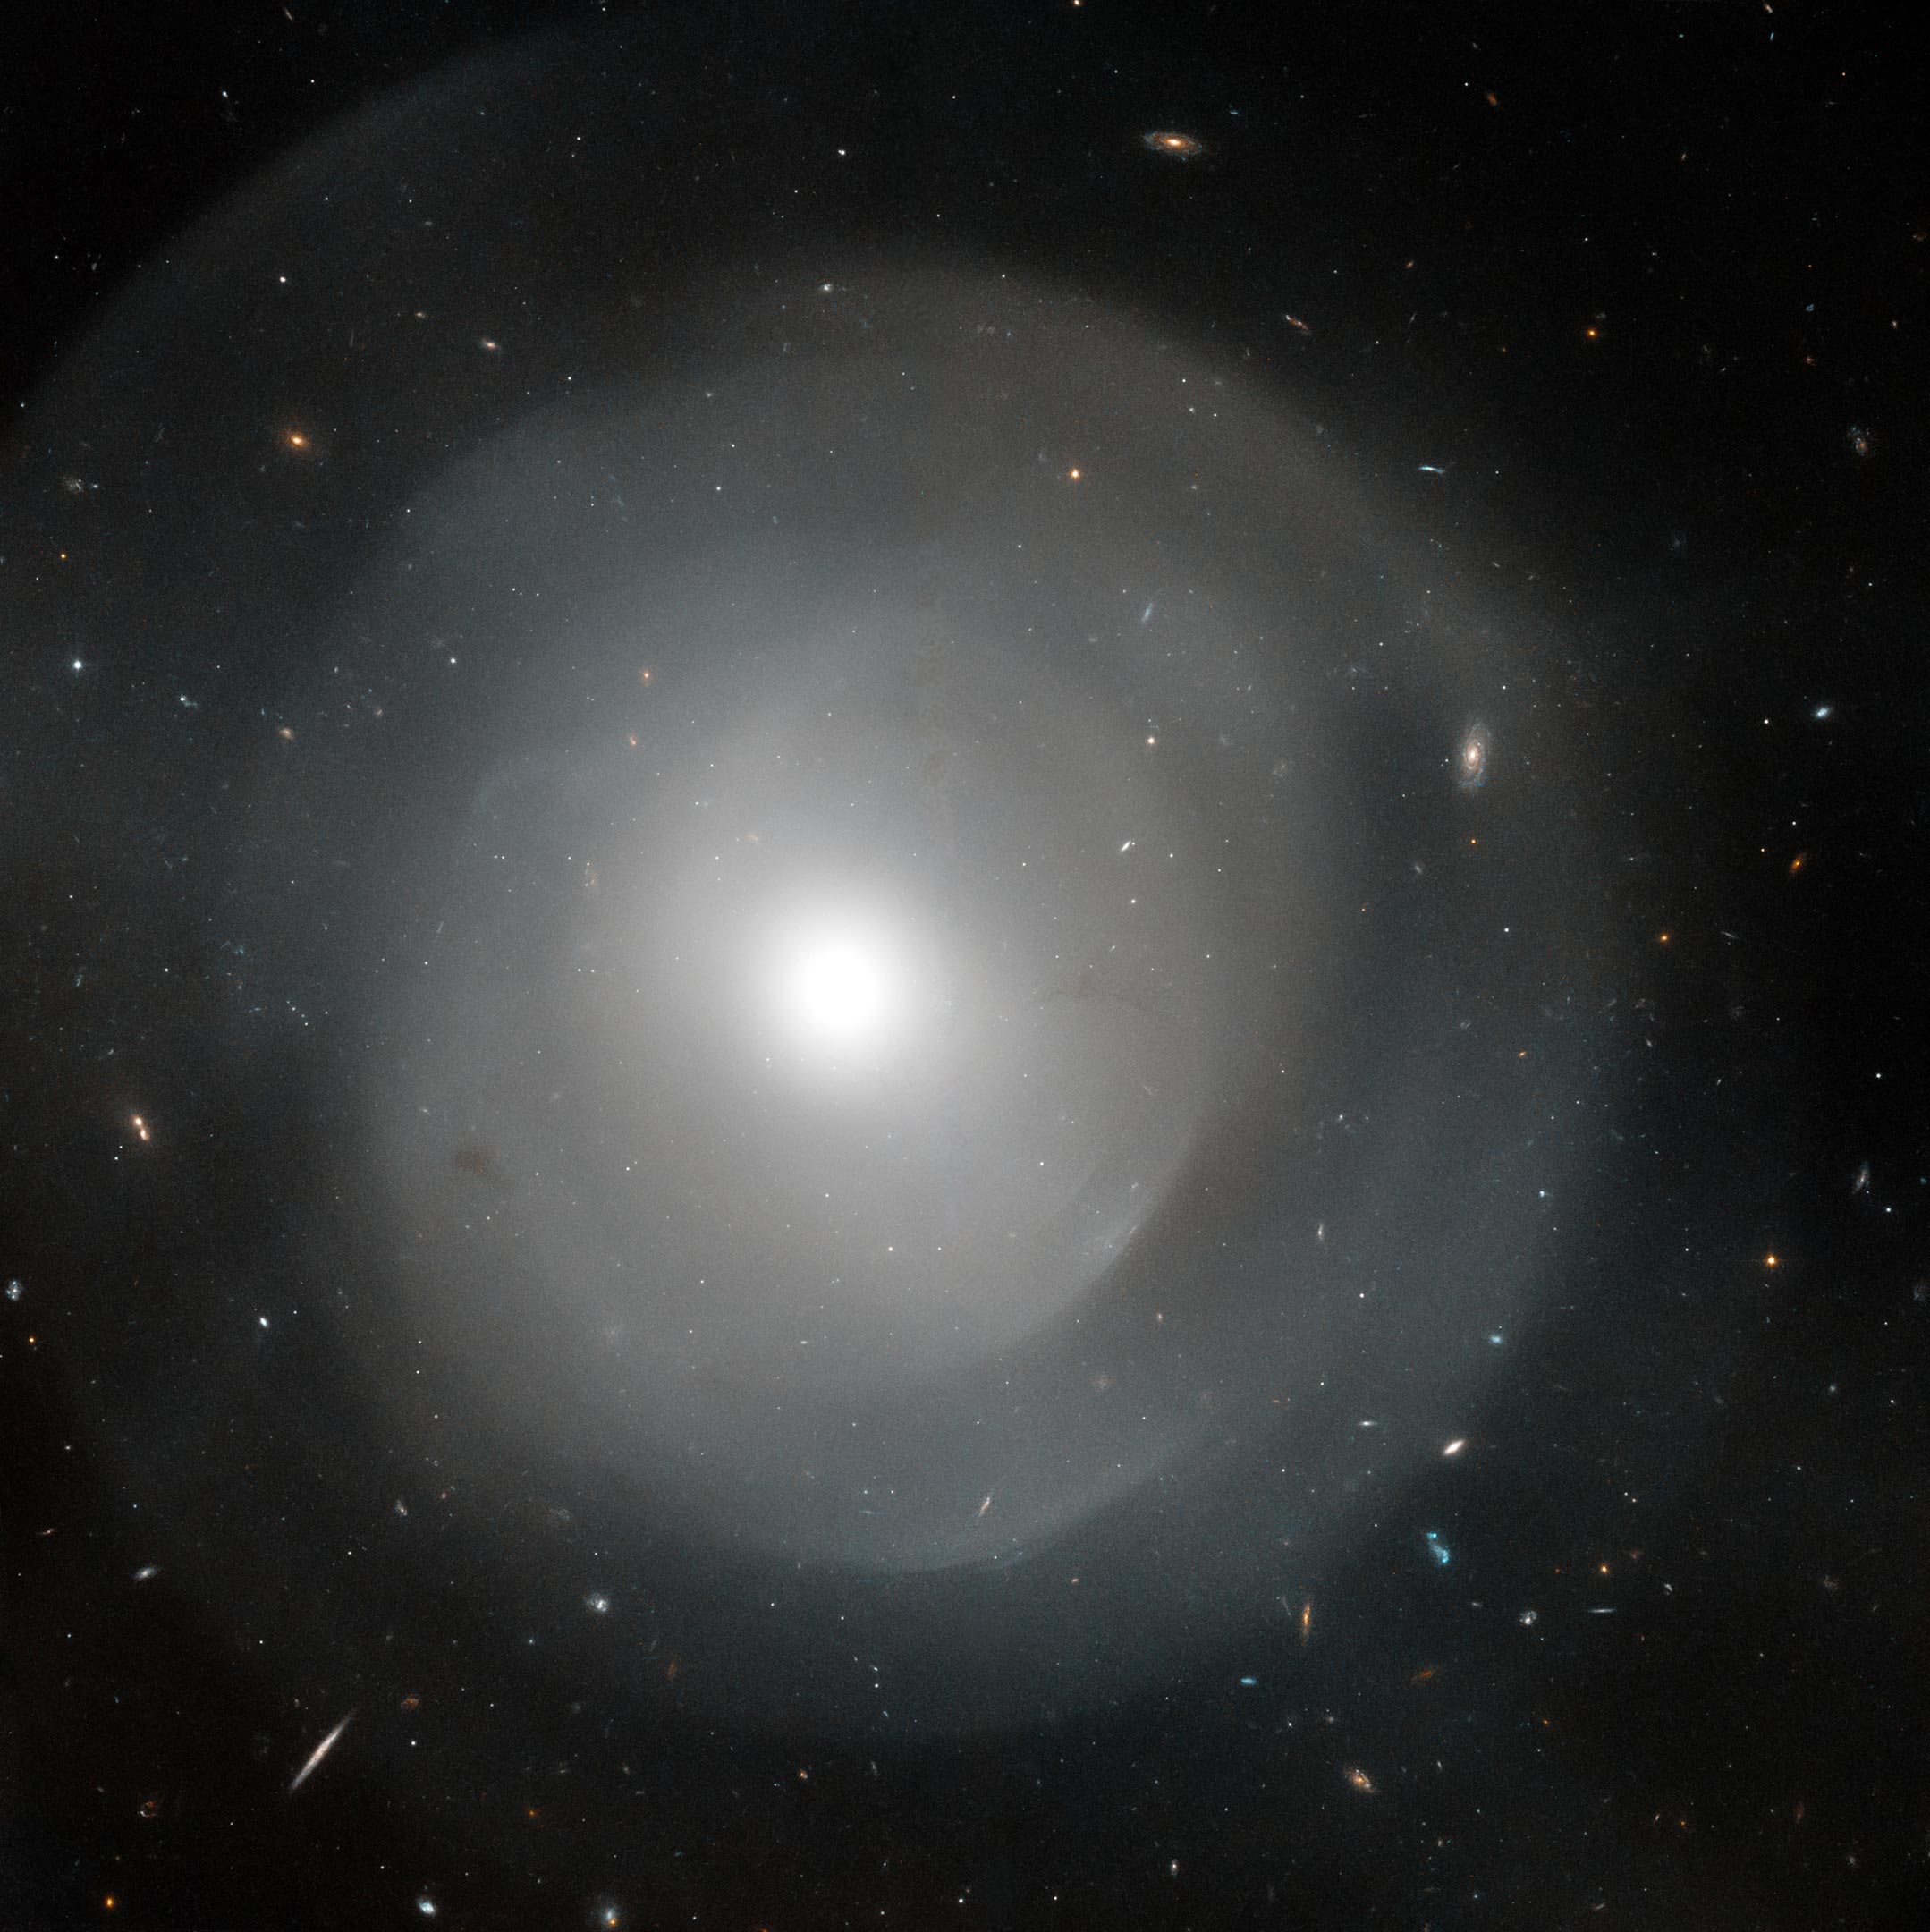 Hubble Space Telescope Peers Through Giant Elliptical Galaxy's Layers - SciTechDaily